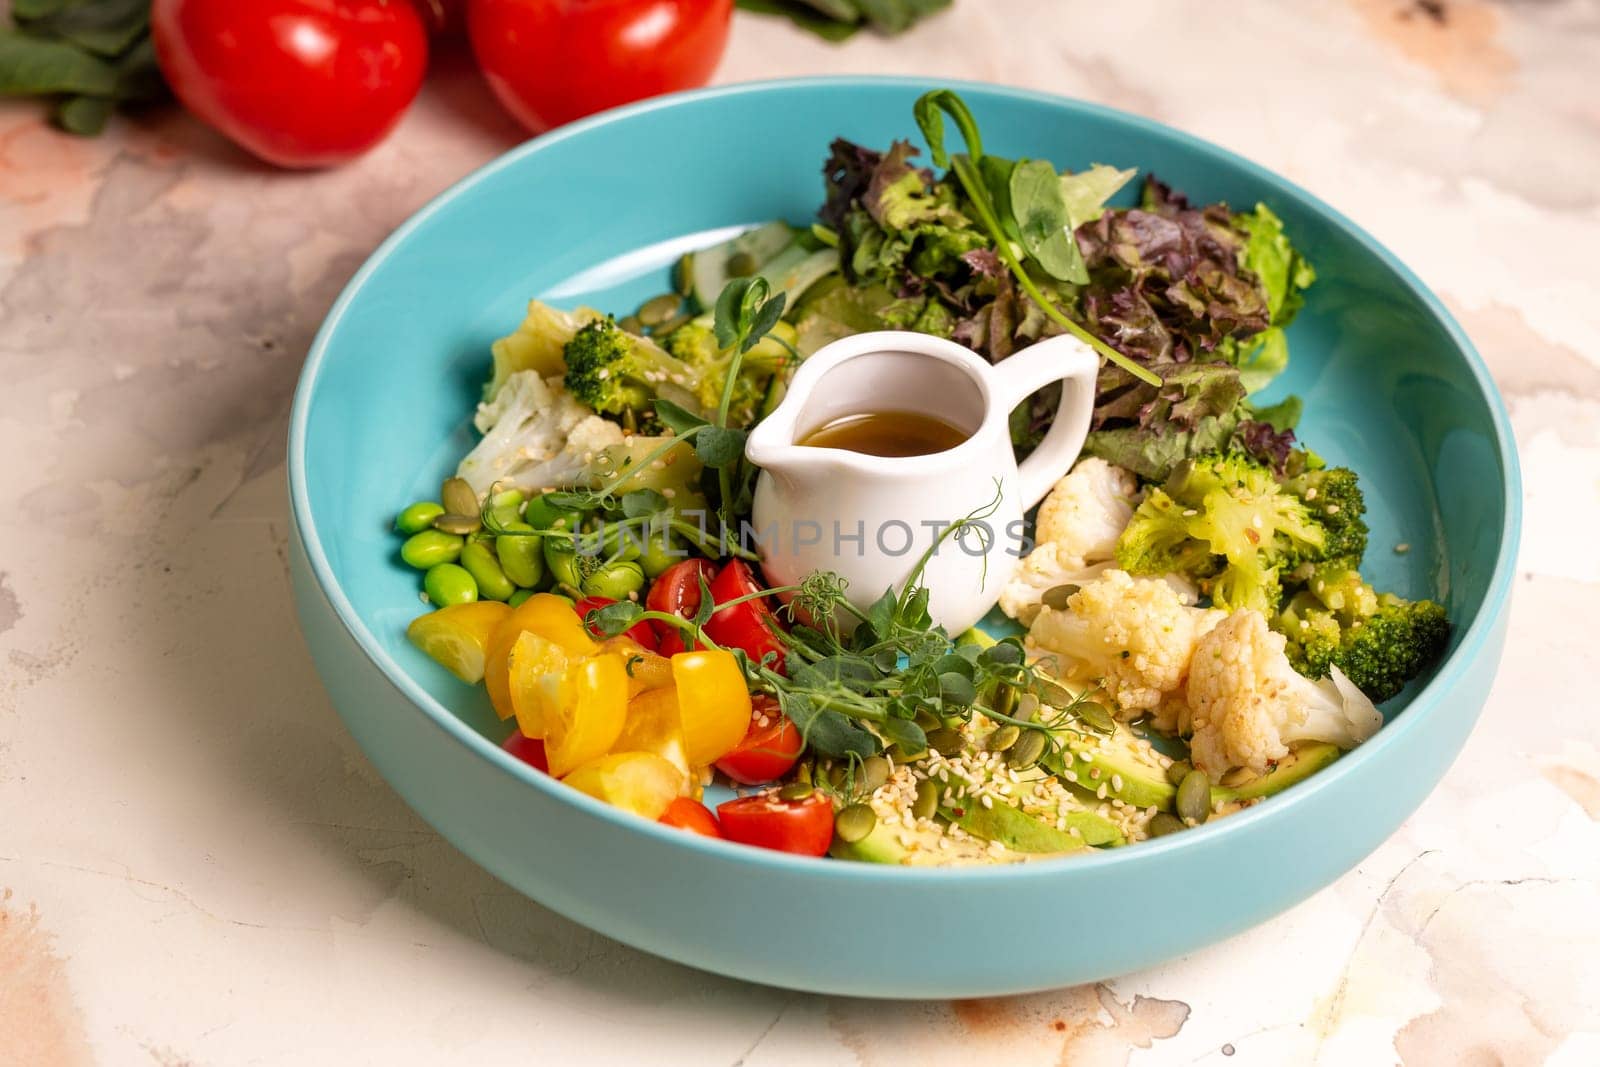 Salad Bowl. Assortment of fresh vegetables, colorful salad, and zesty dressing on a plate. Encouraging a balanced and nutritious diet.